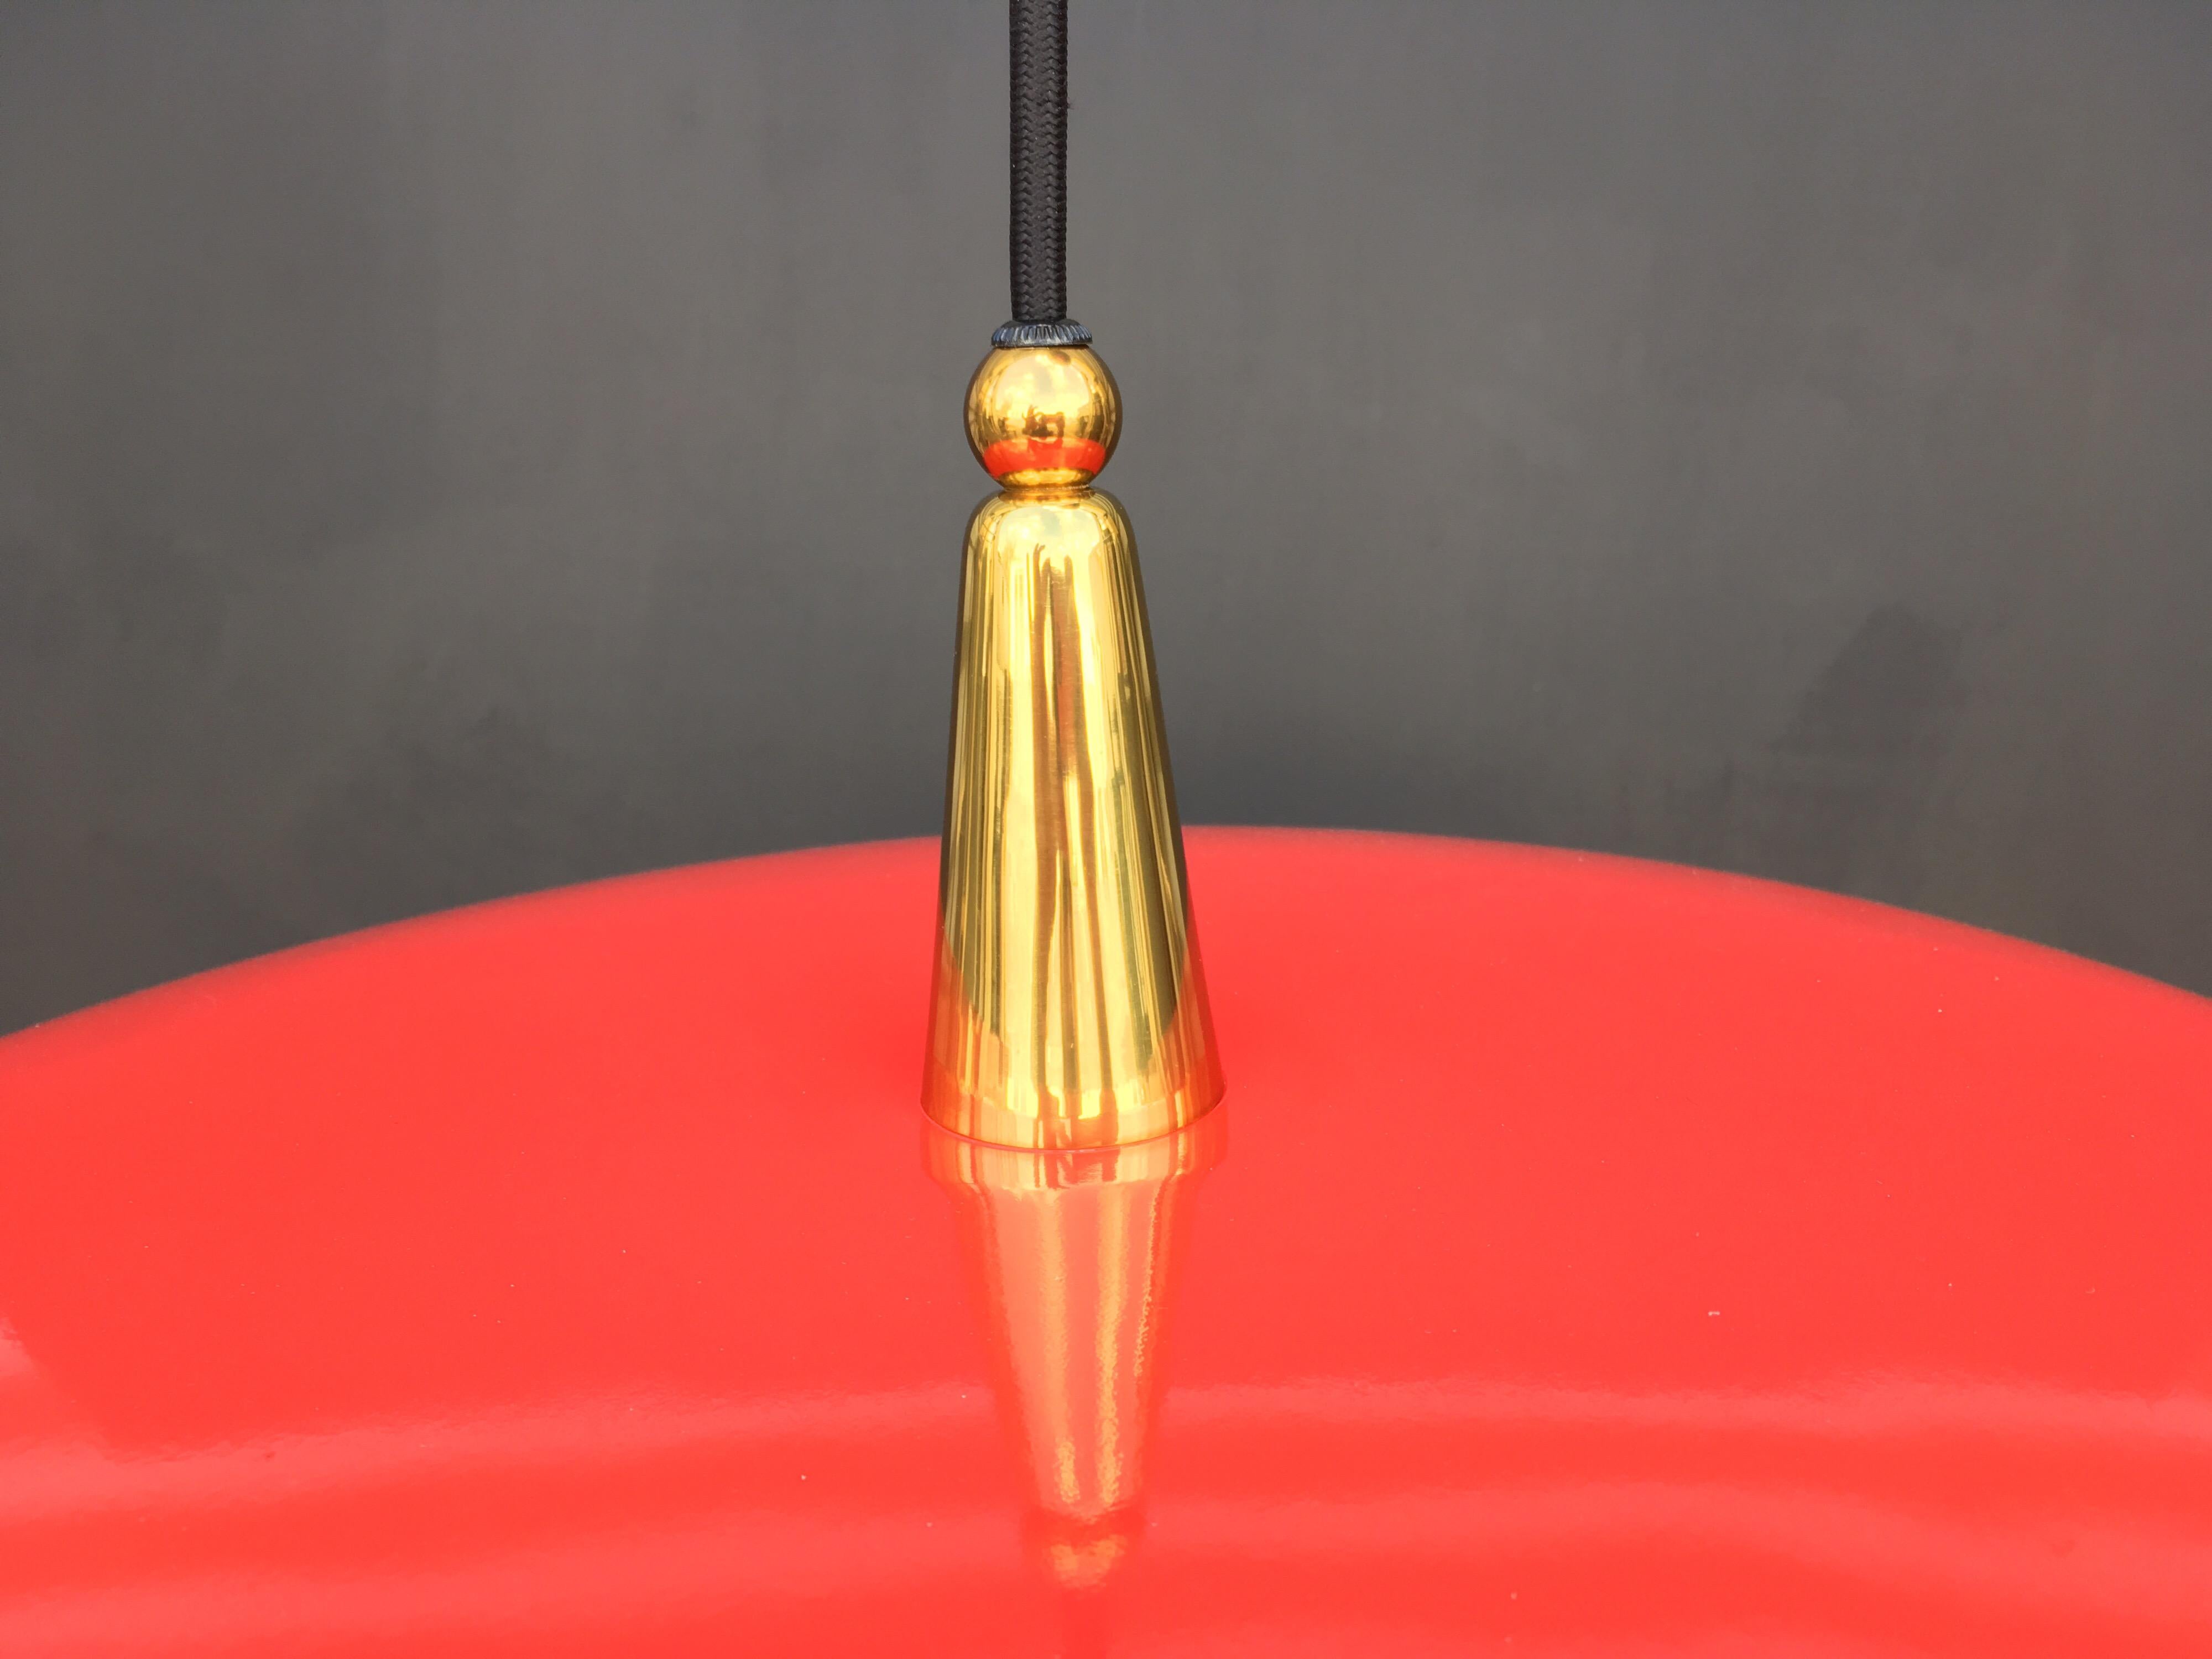 Italian Counter Weight Chandelier Lamp Pendant, Brass and Red Lacquer, 1950s 4